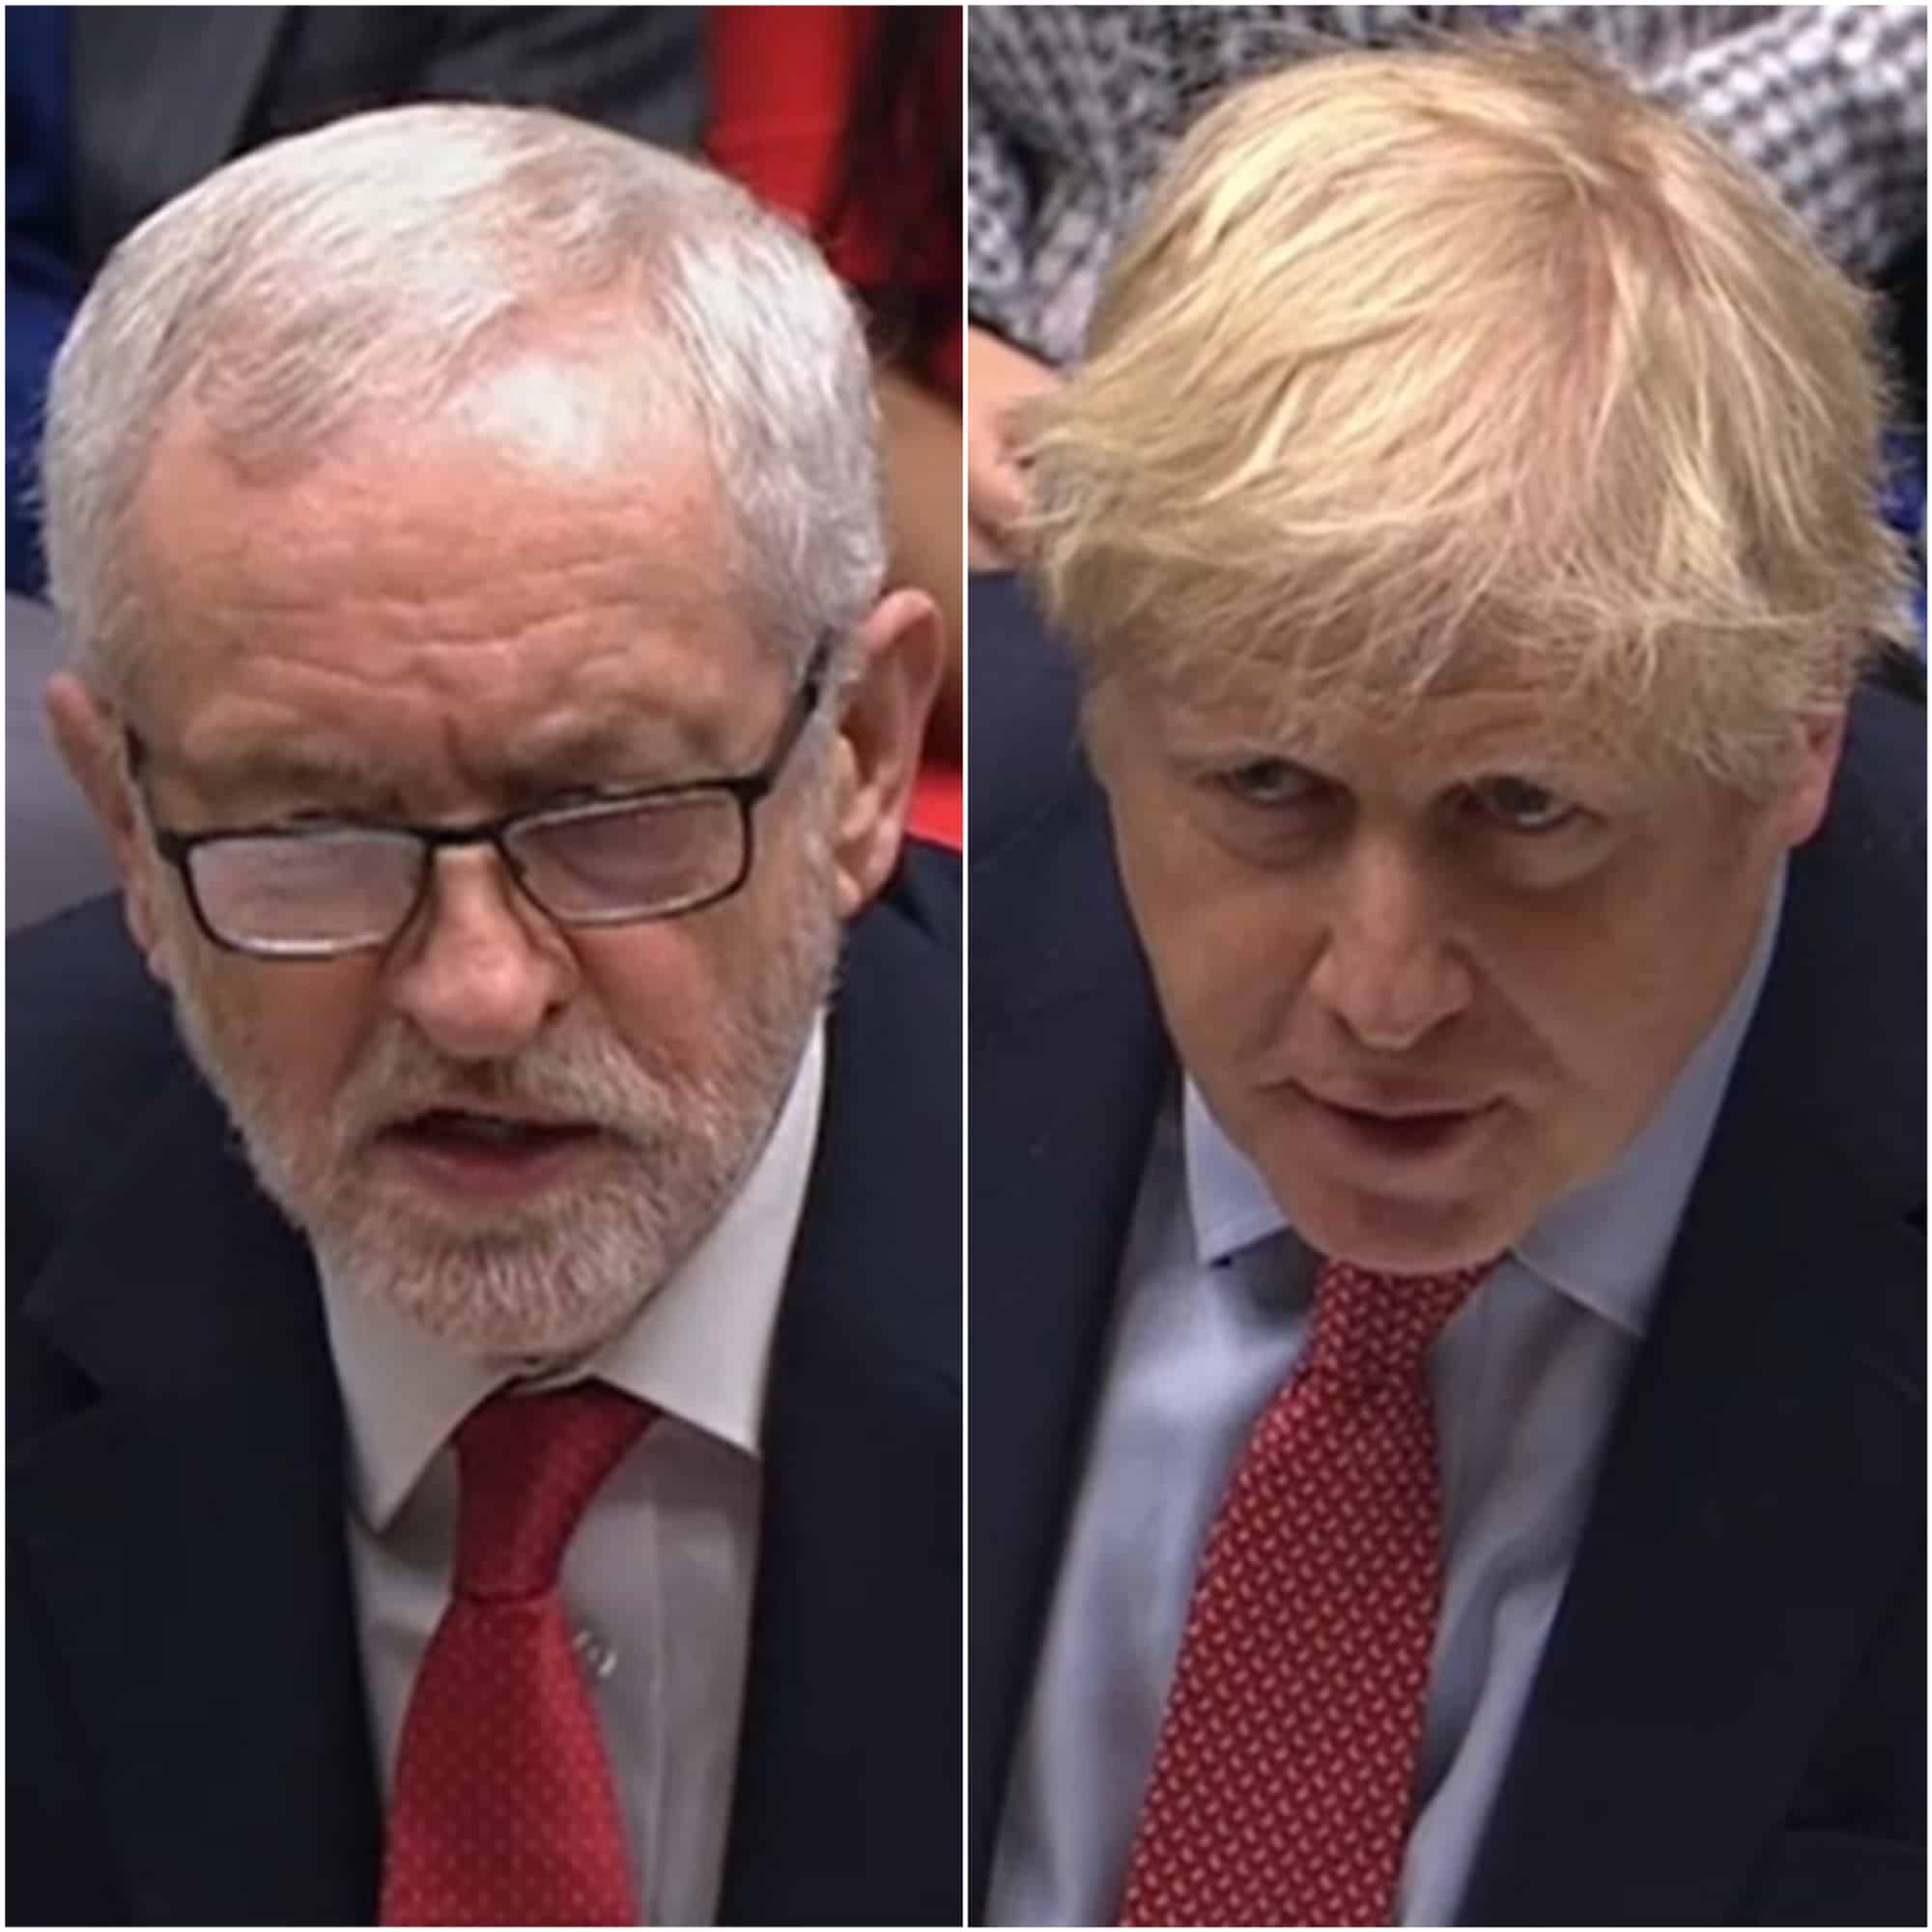 Corbyn accuses Johnson of dodging questions over Universal Credit